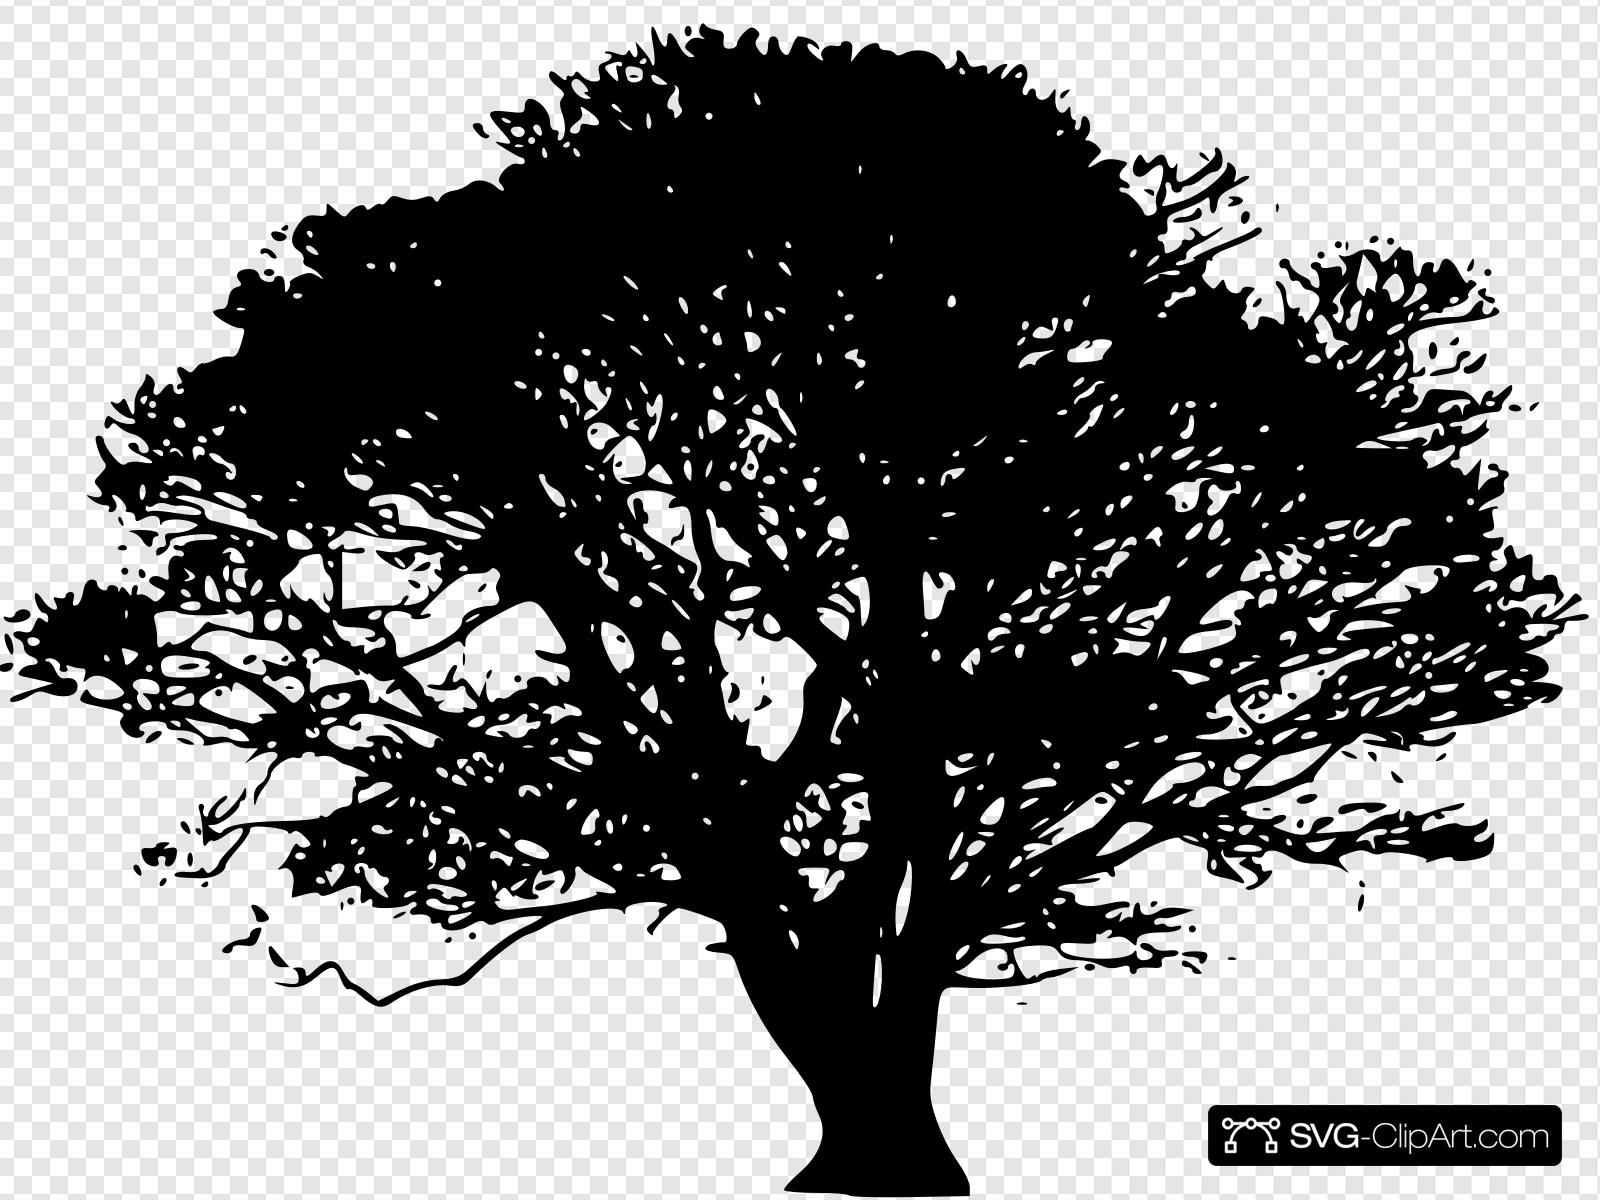 Oak Tree With Transparent Background Clip art, Icon and SVG